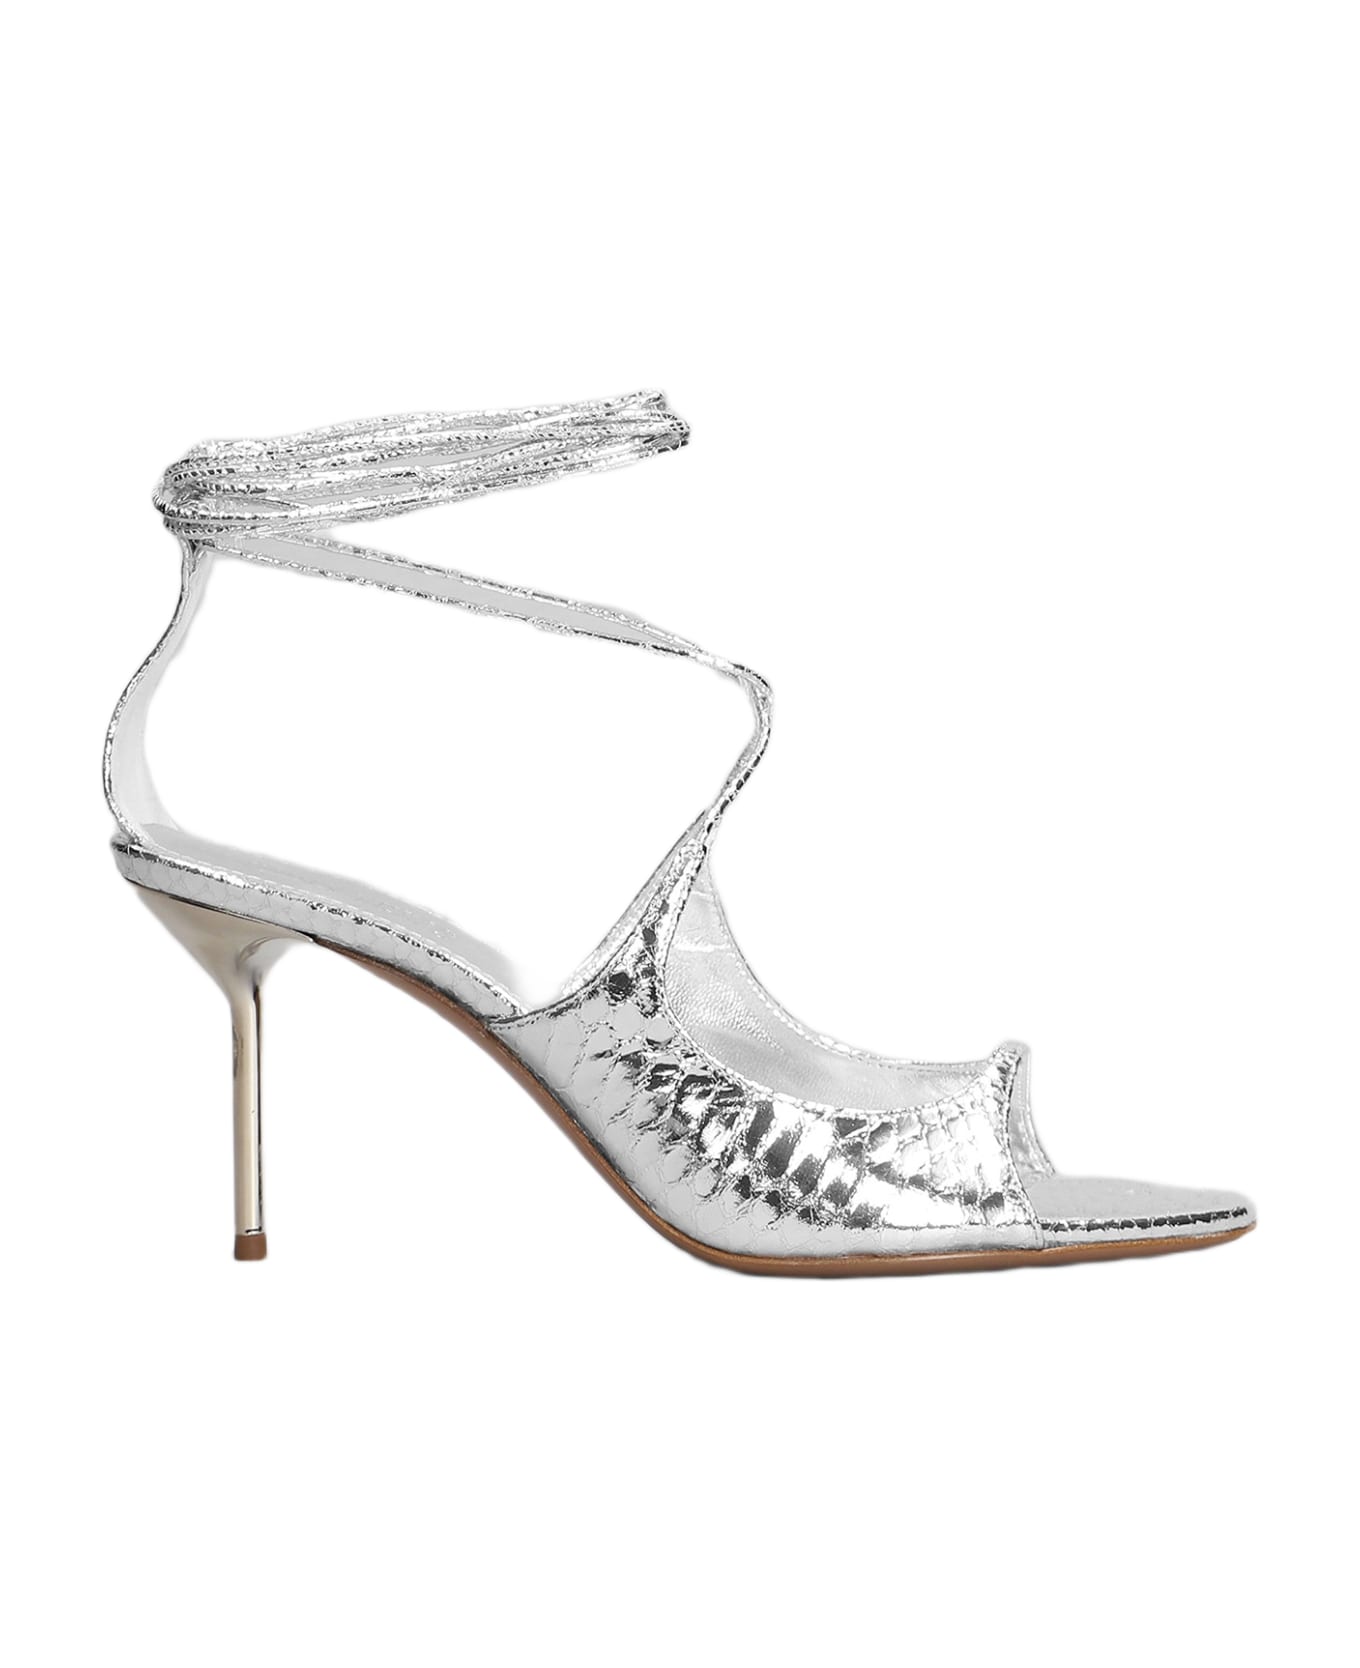 Paris Texas Loulou Sandals In Silver Leather - silver